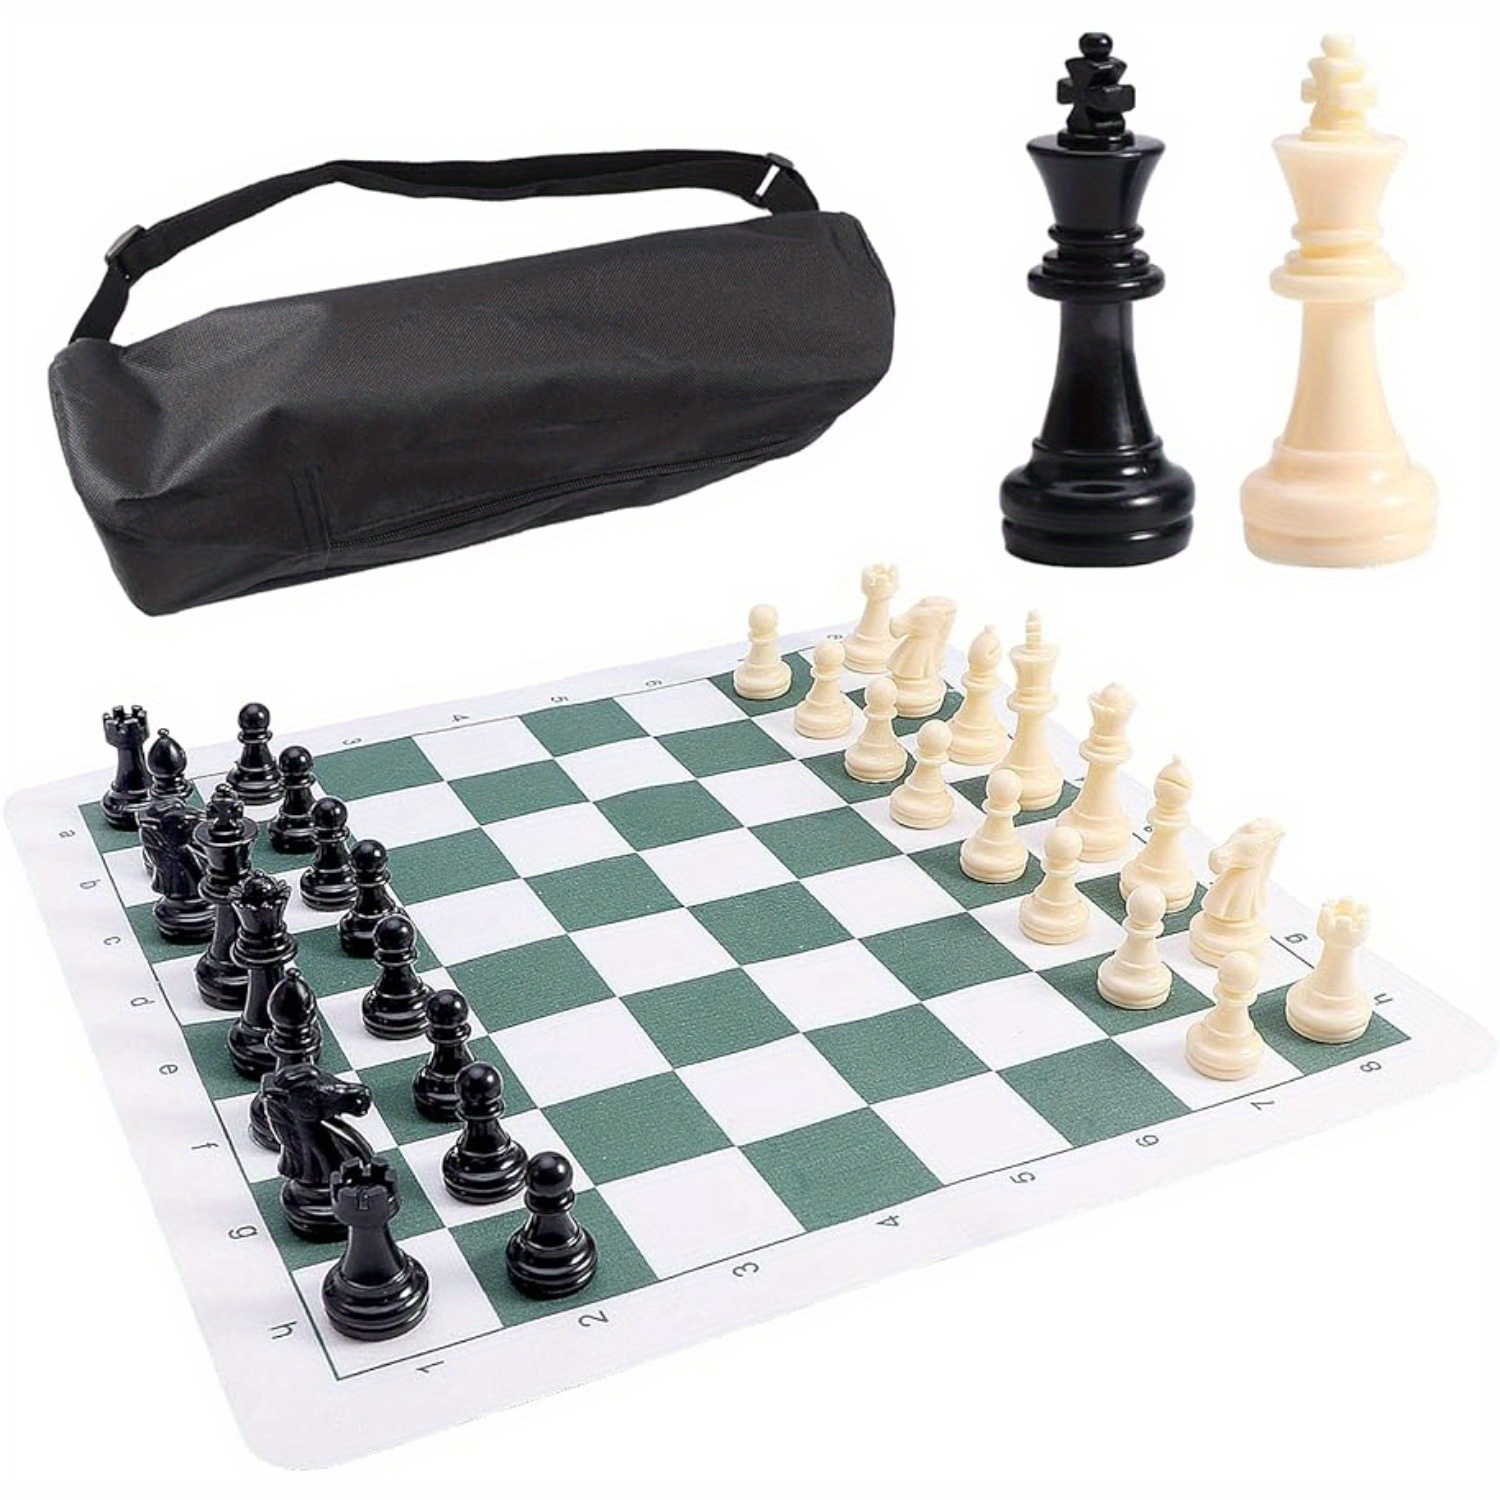 

Tournament Chess Mat With Chess & Storage Bag, Pu Leather Tournament Roll Up Chess Board, Party Gathering Game Supplies